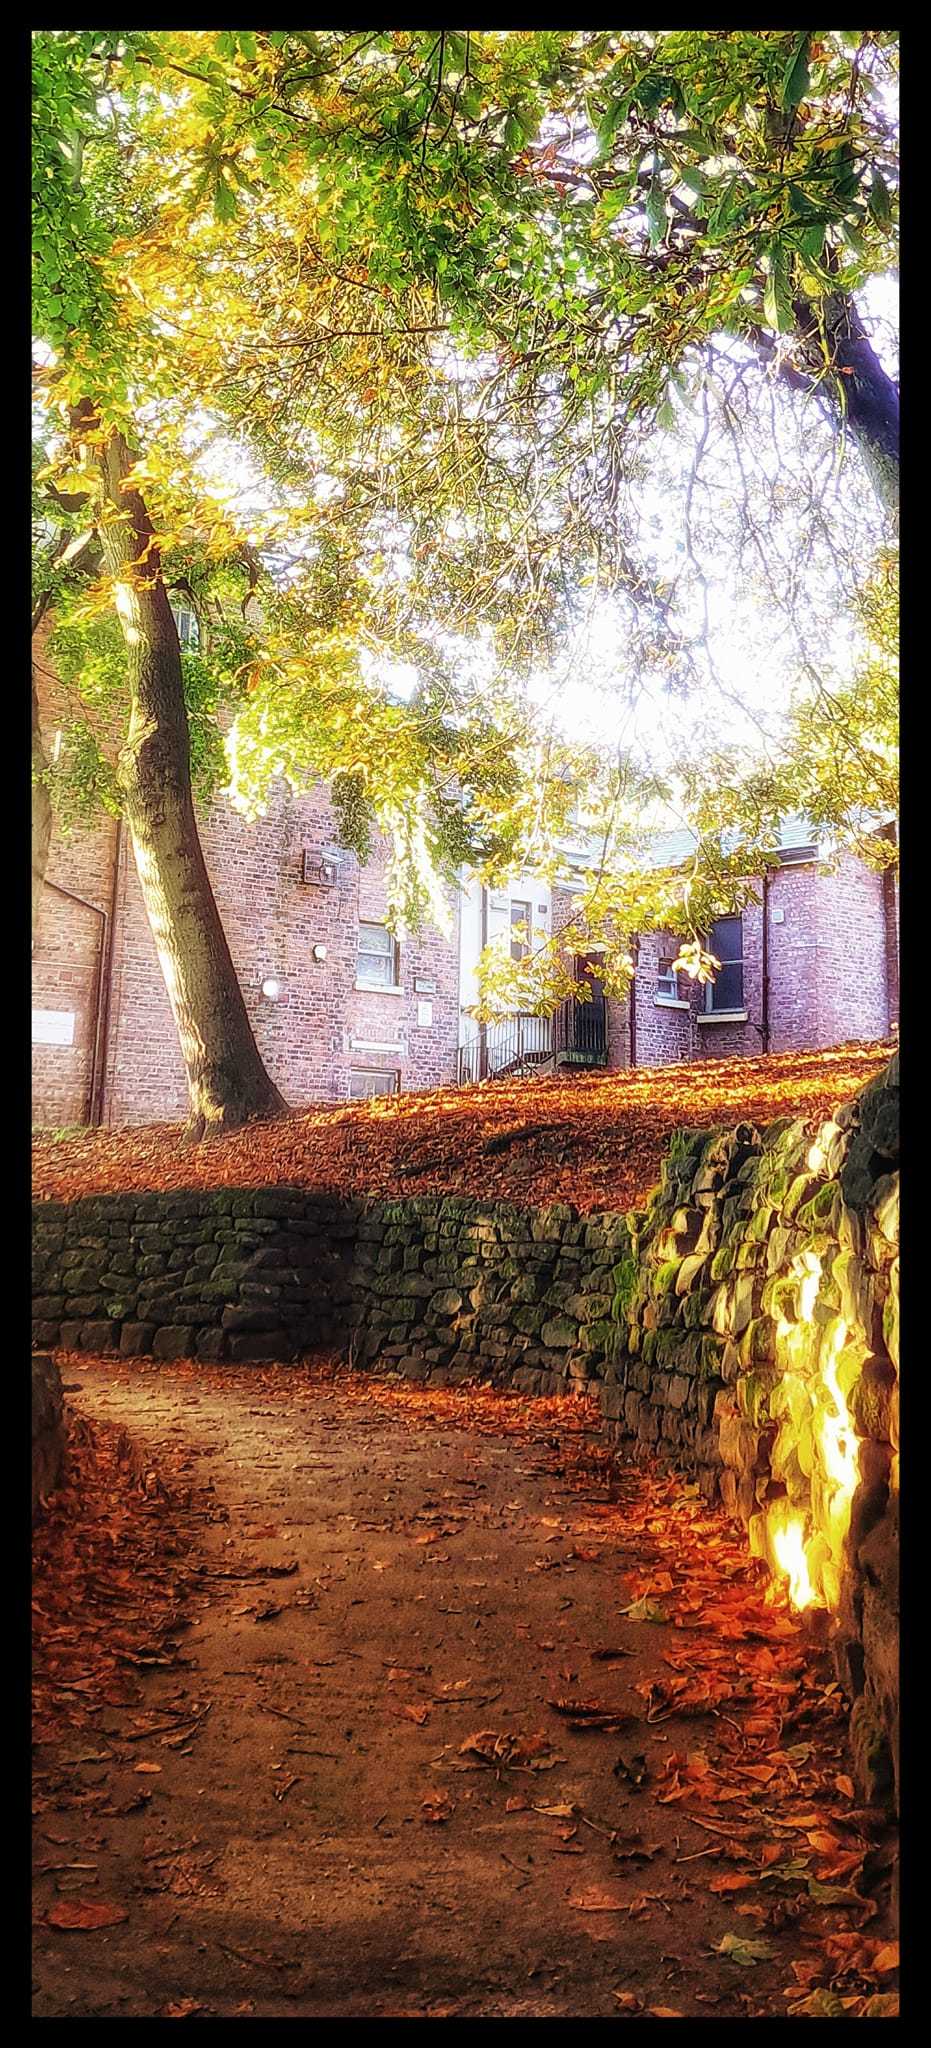 Vale Park in the autumn sunshine by Paul Neish